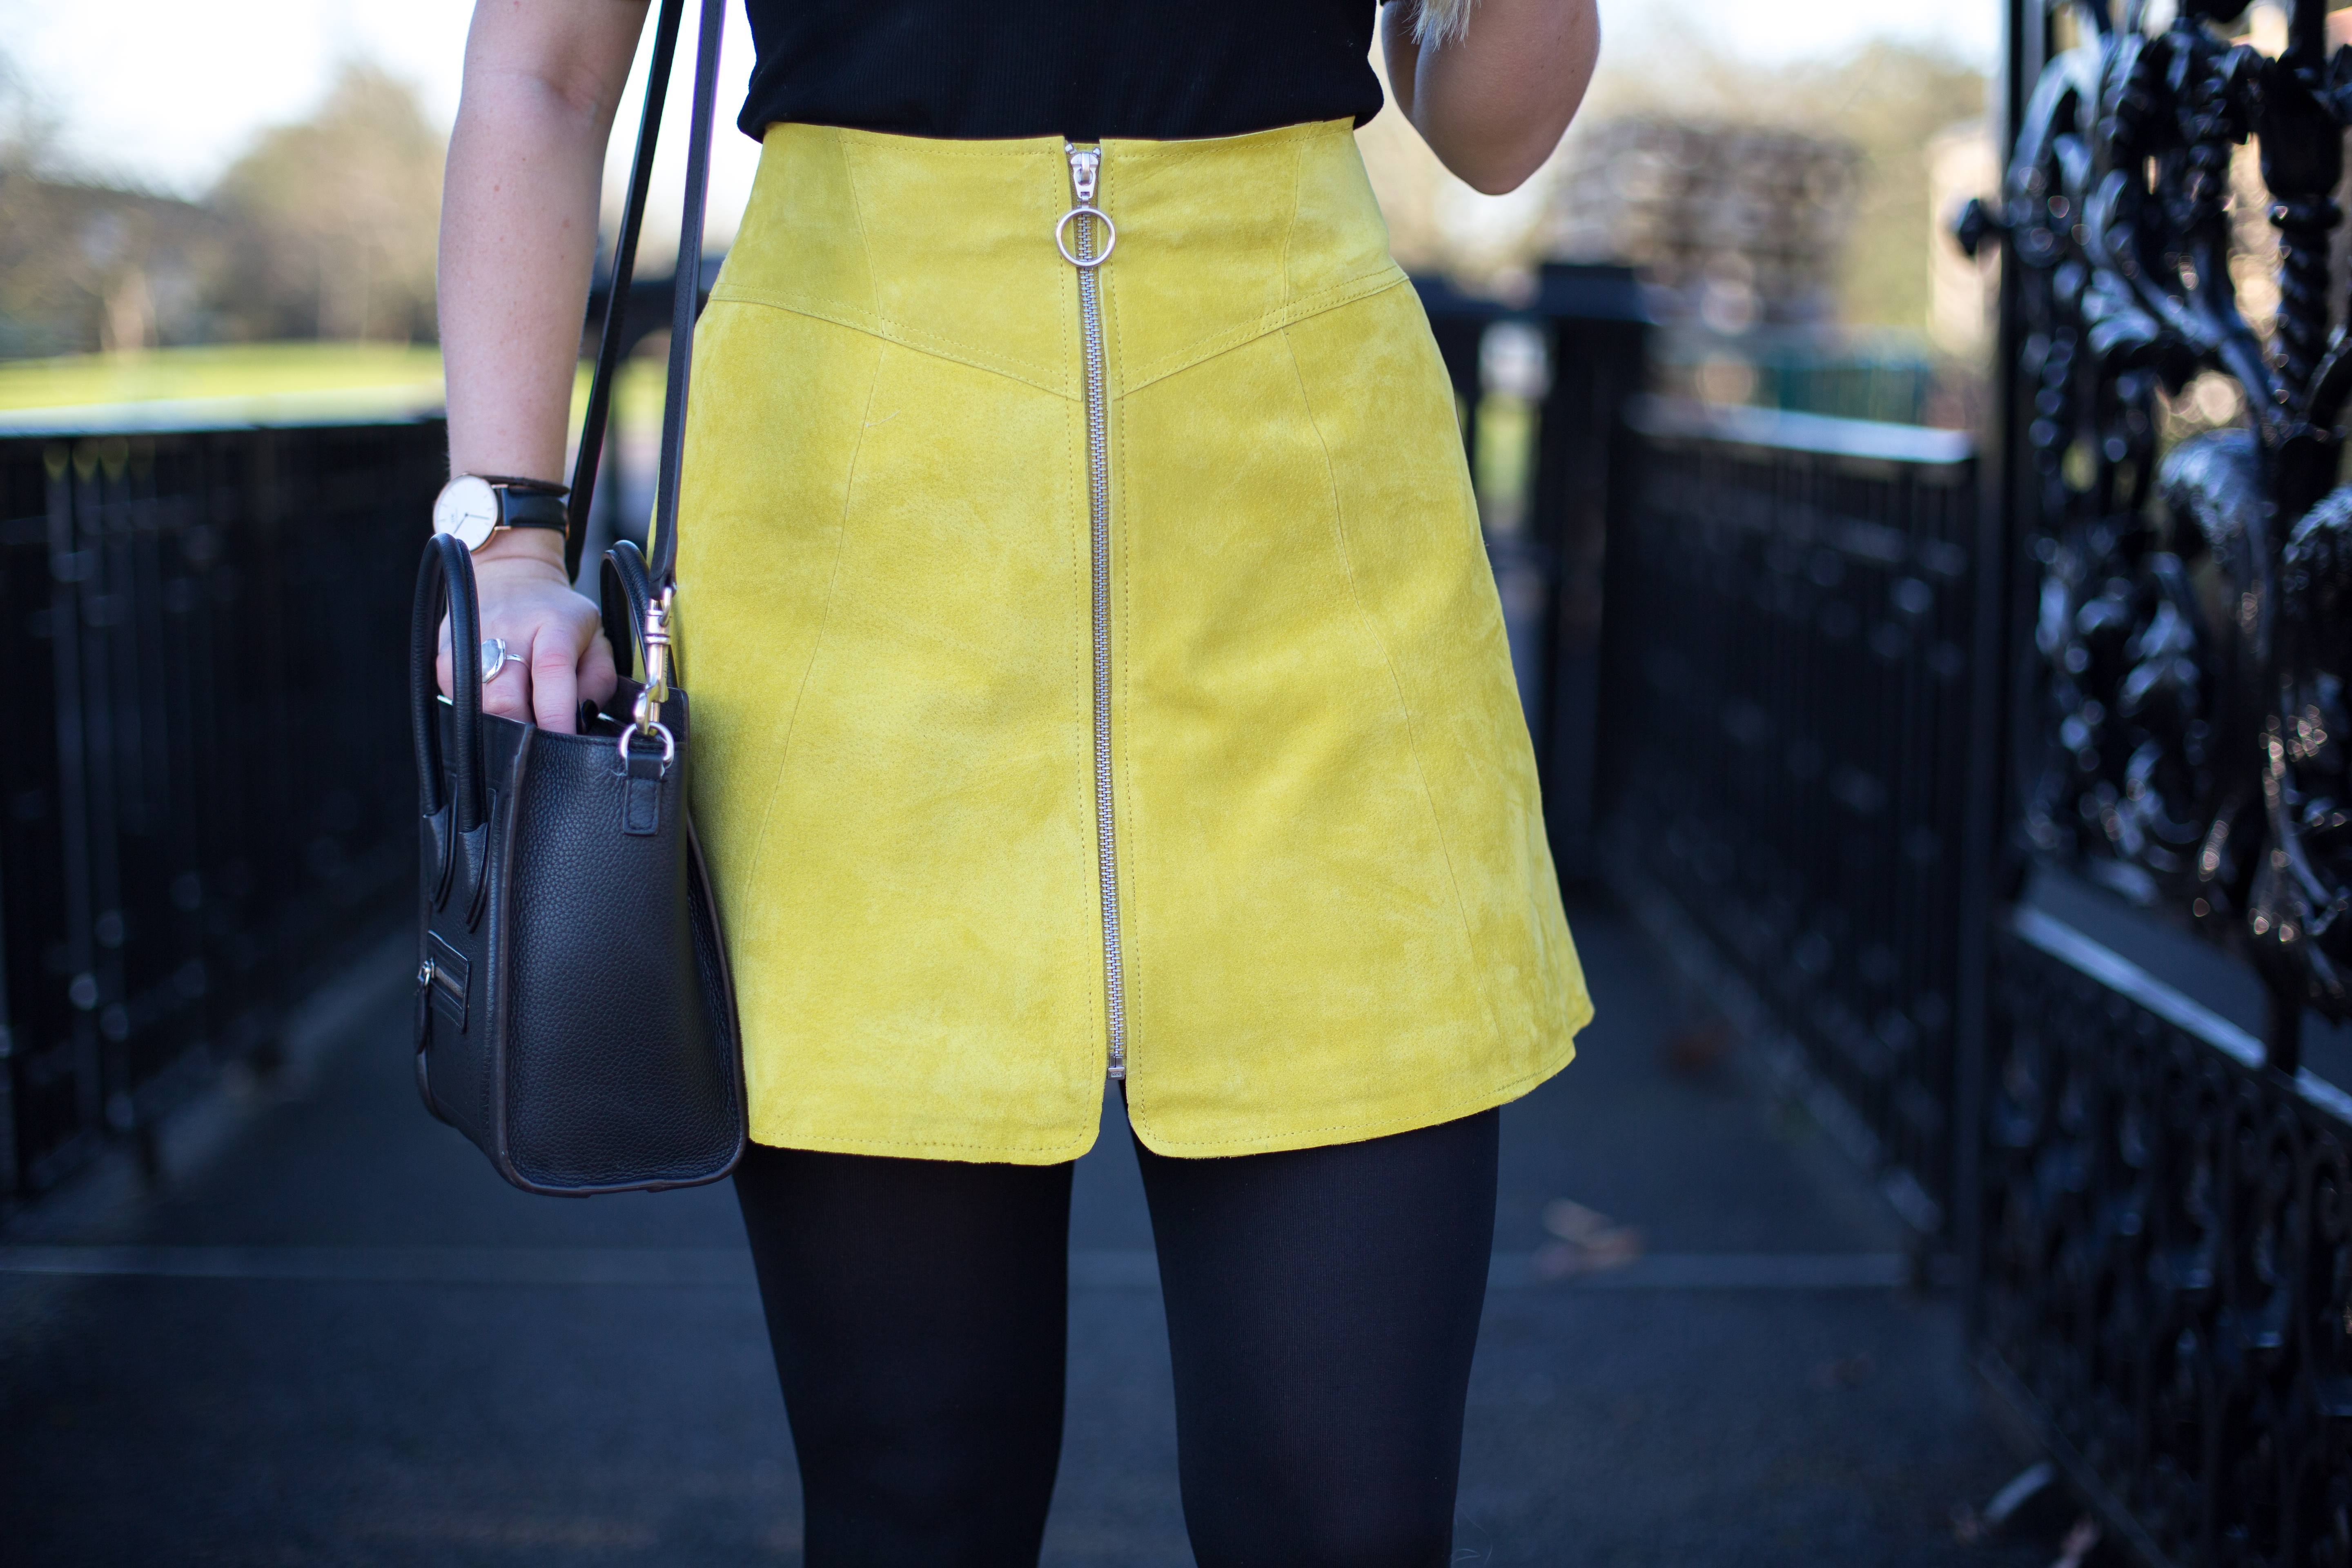 HOW TO WEAR A SUEDE SKIRT - Mediamarmalade